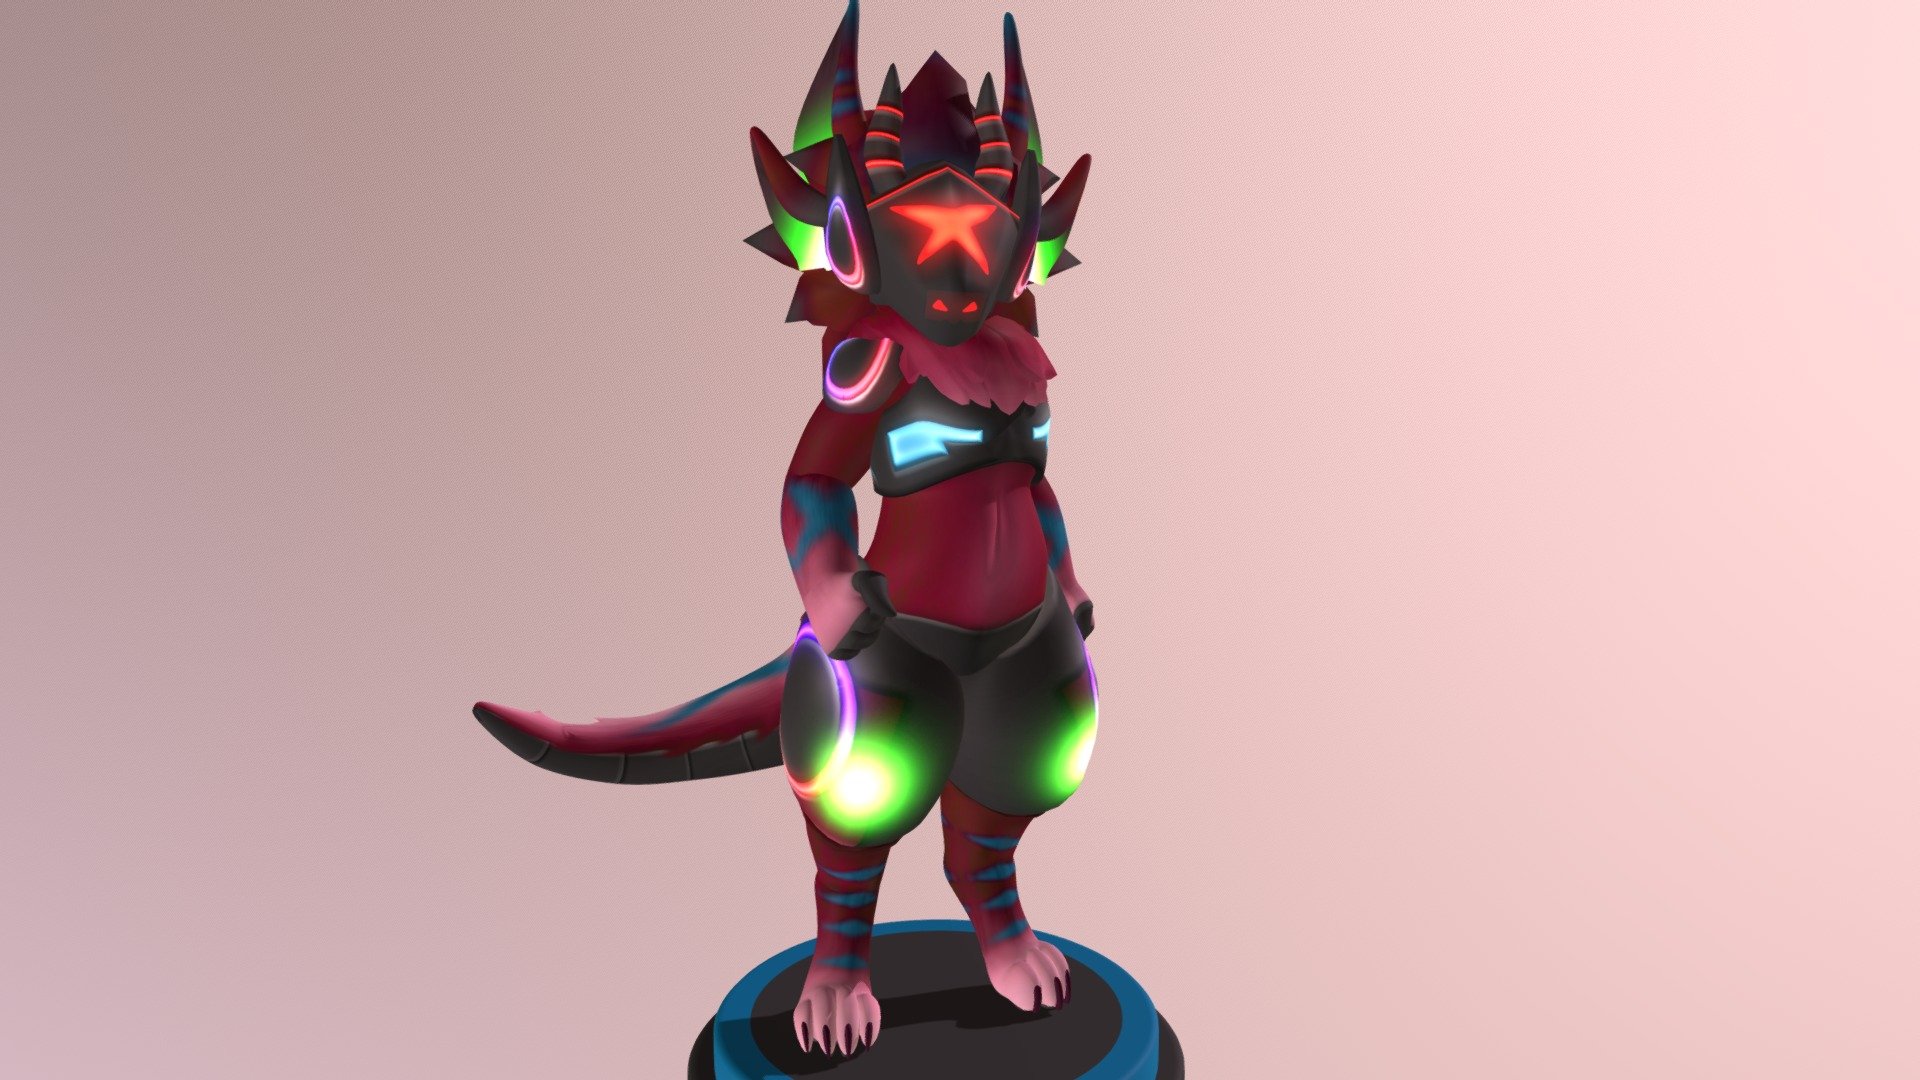 Comission to @Jessica_Osteen
Commissions: https://www.furaffinity.net/commissions/hickysnow/ - Protogen - 3D model by HickySnow (@Hicky_Snow) 3d model